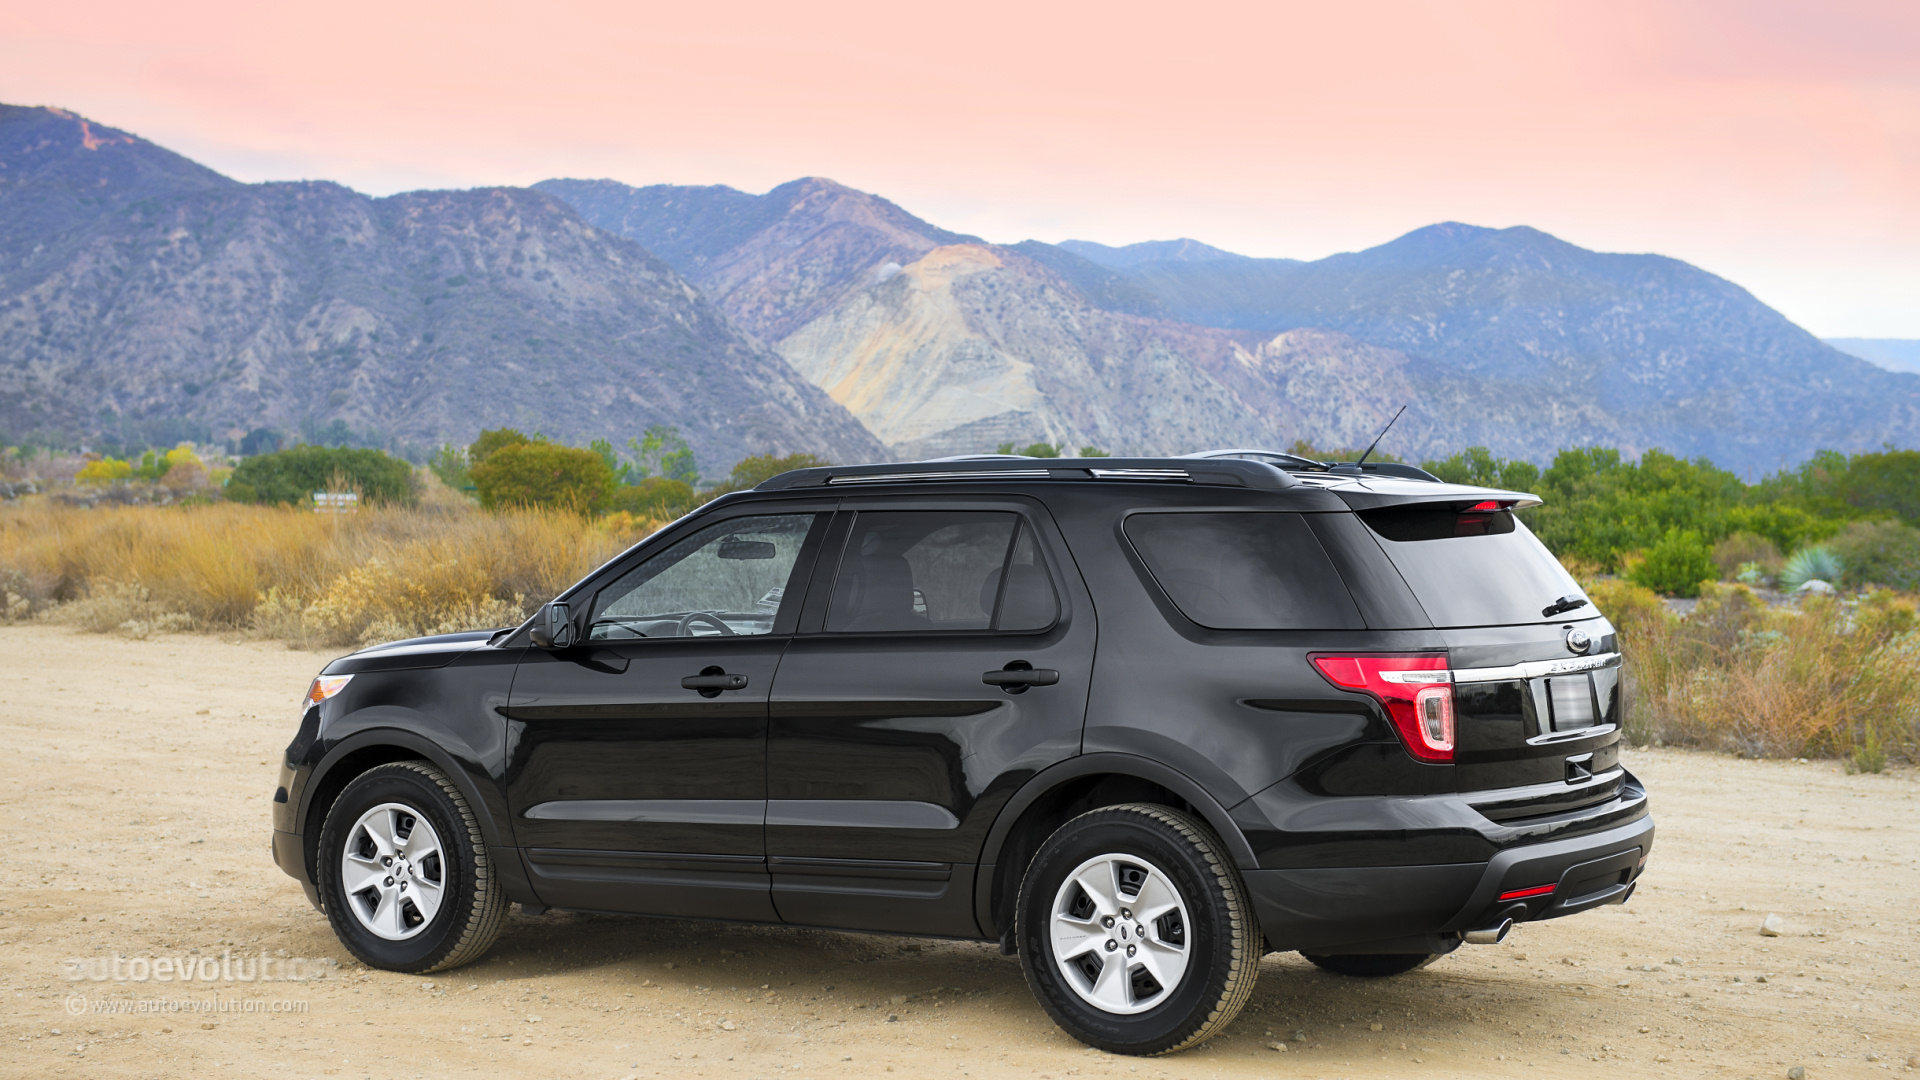 2014 Ford explorer review video